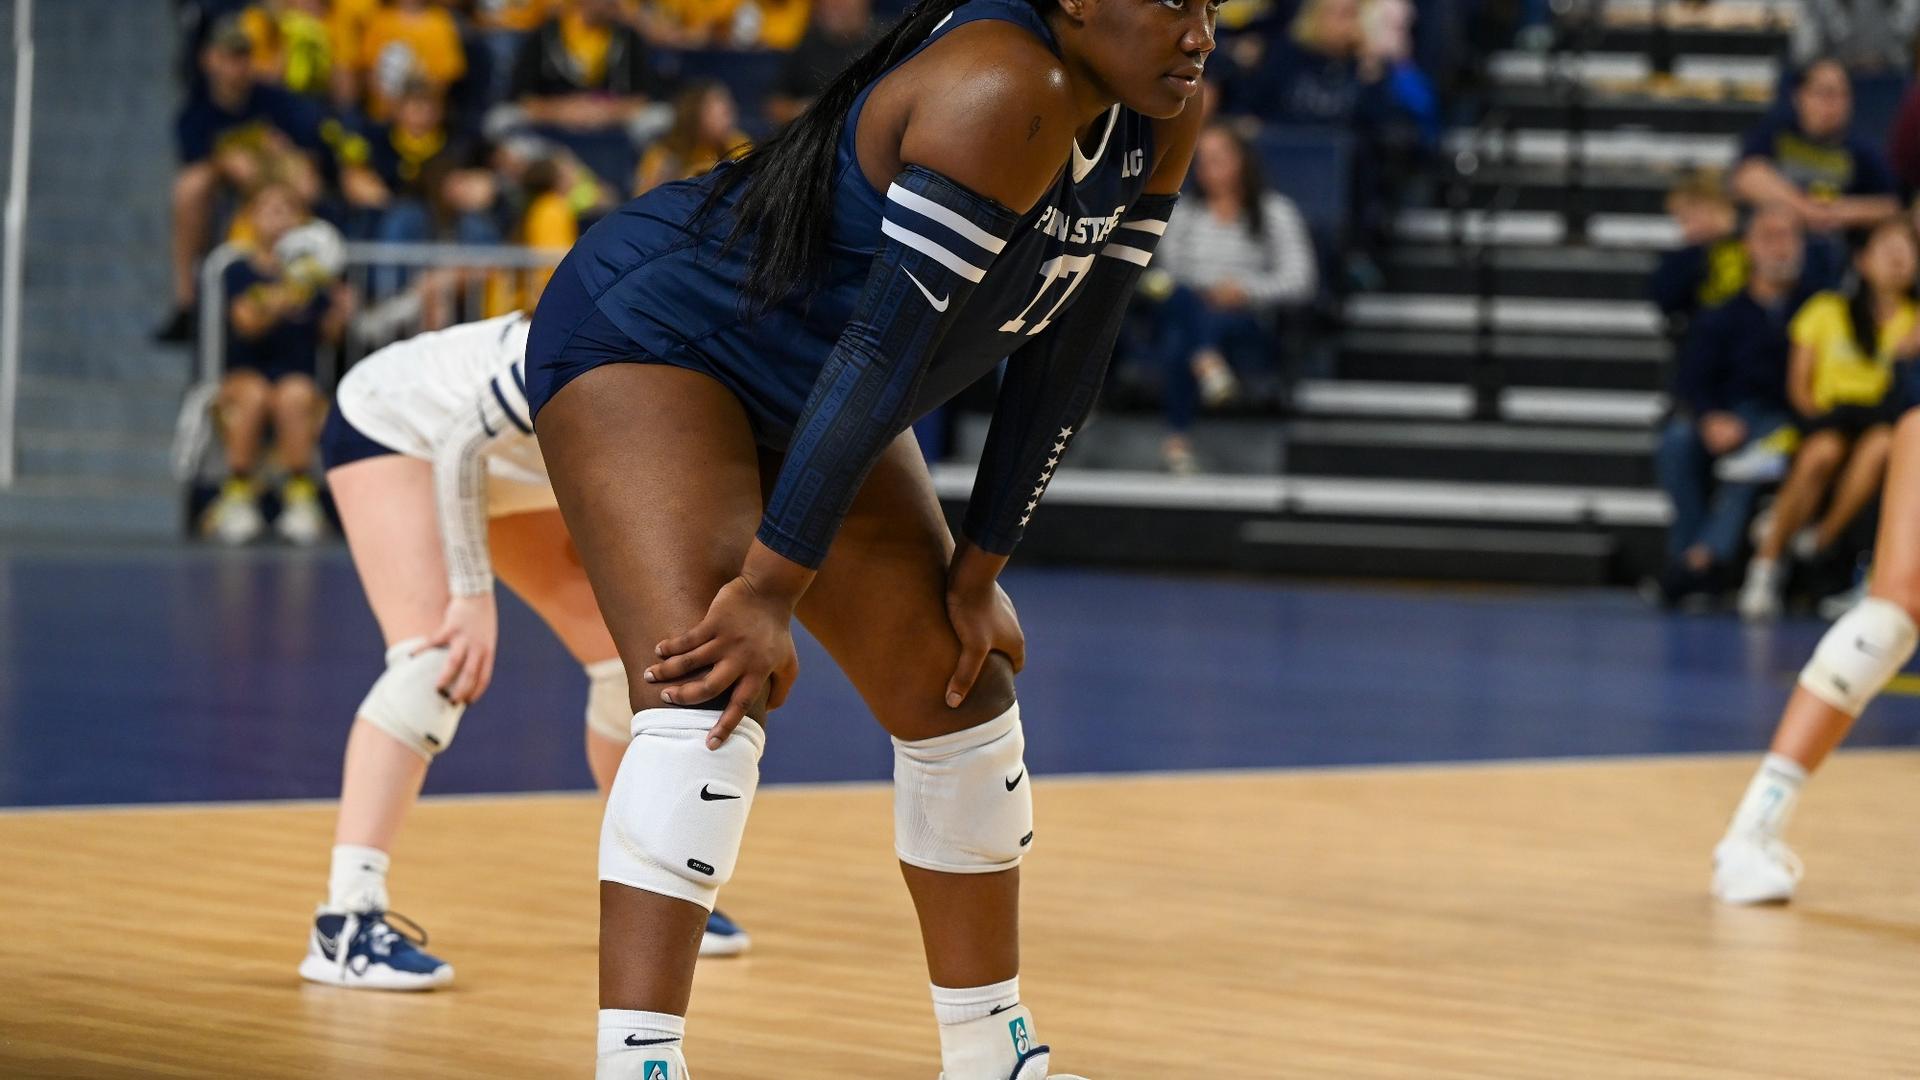 Weatherington Drafted by San Diego Mojo of the Pro Volleyball Federation